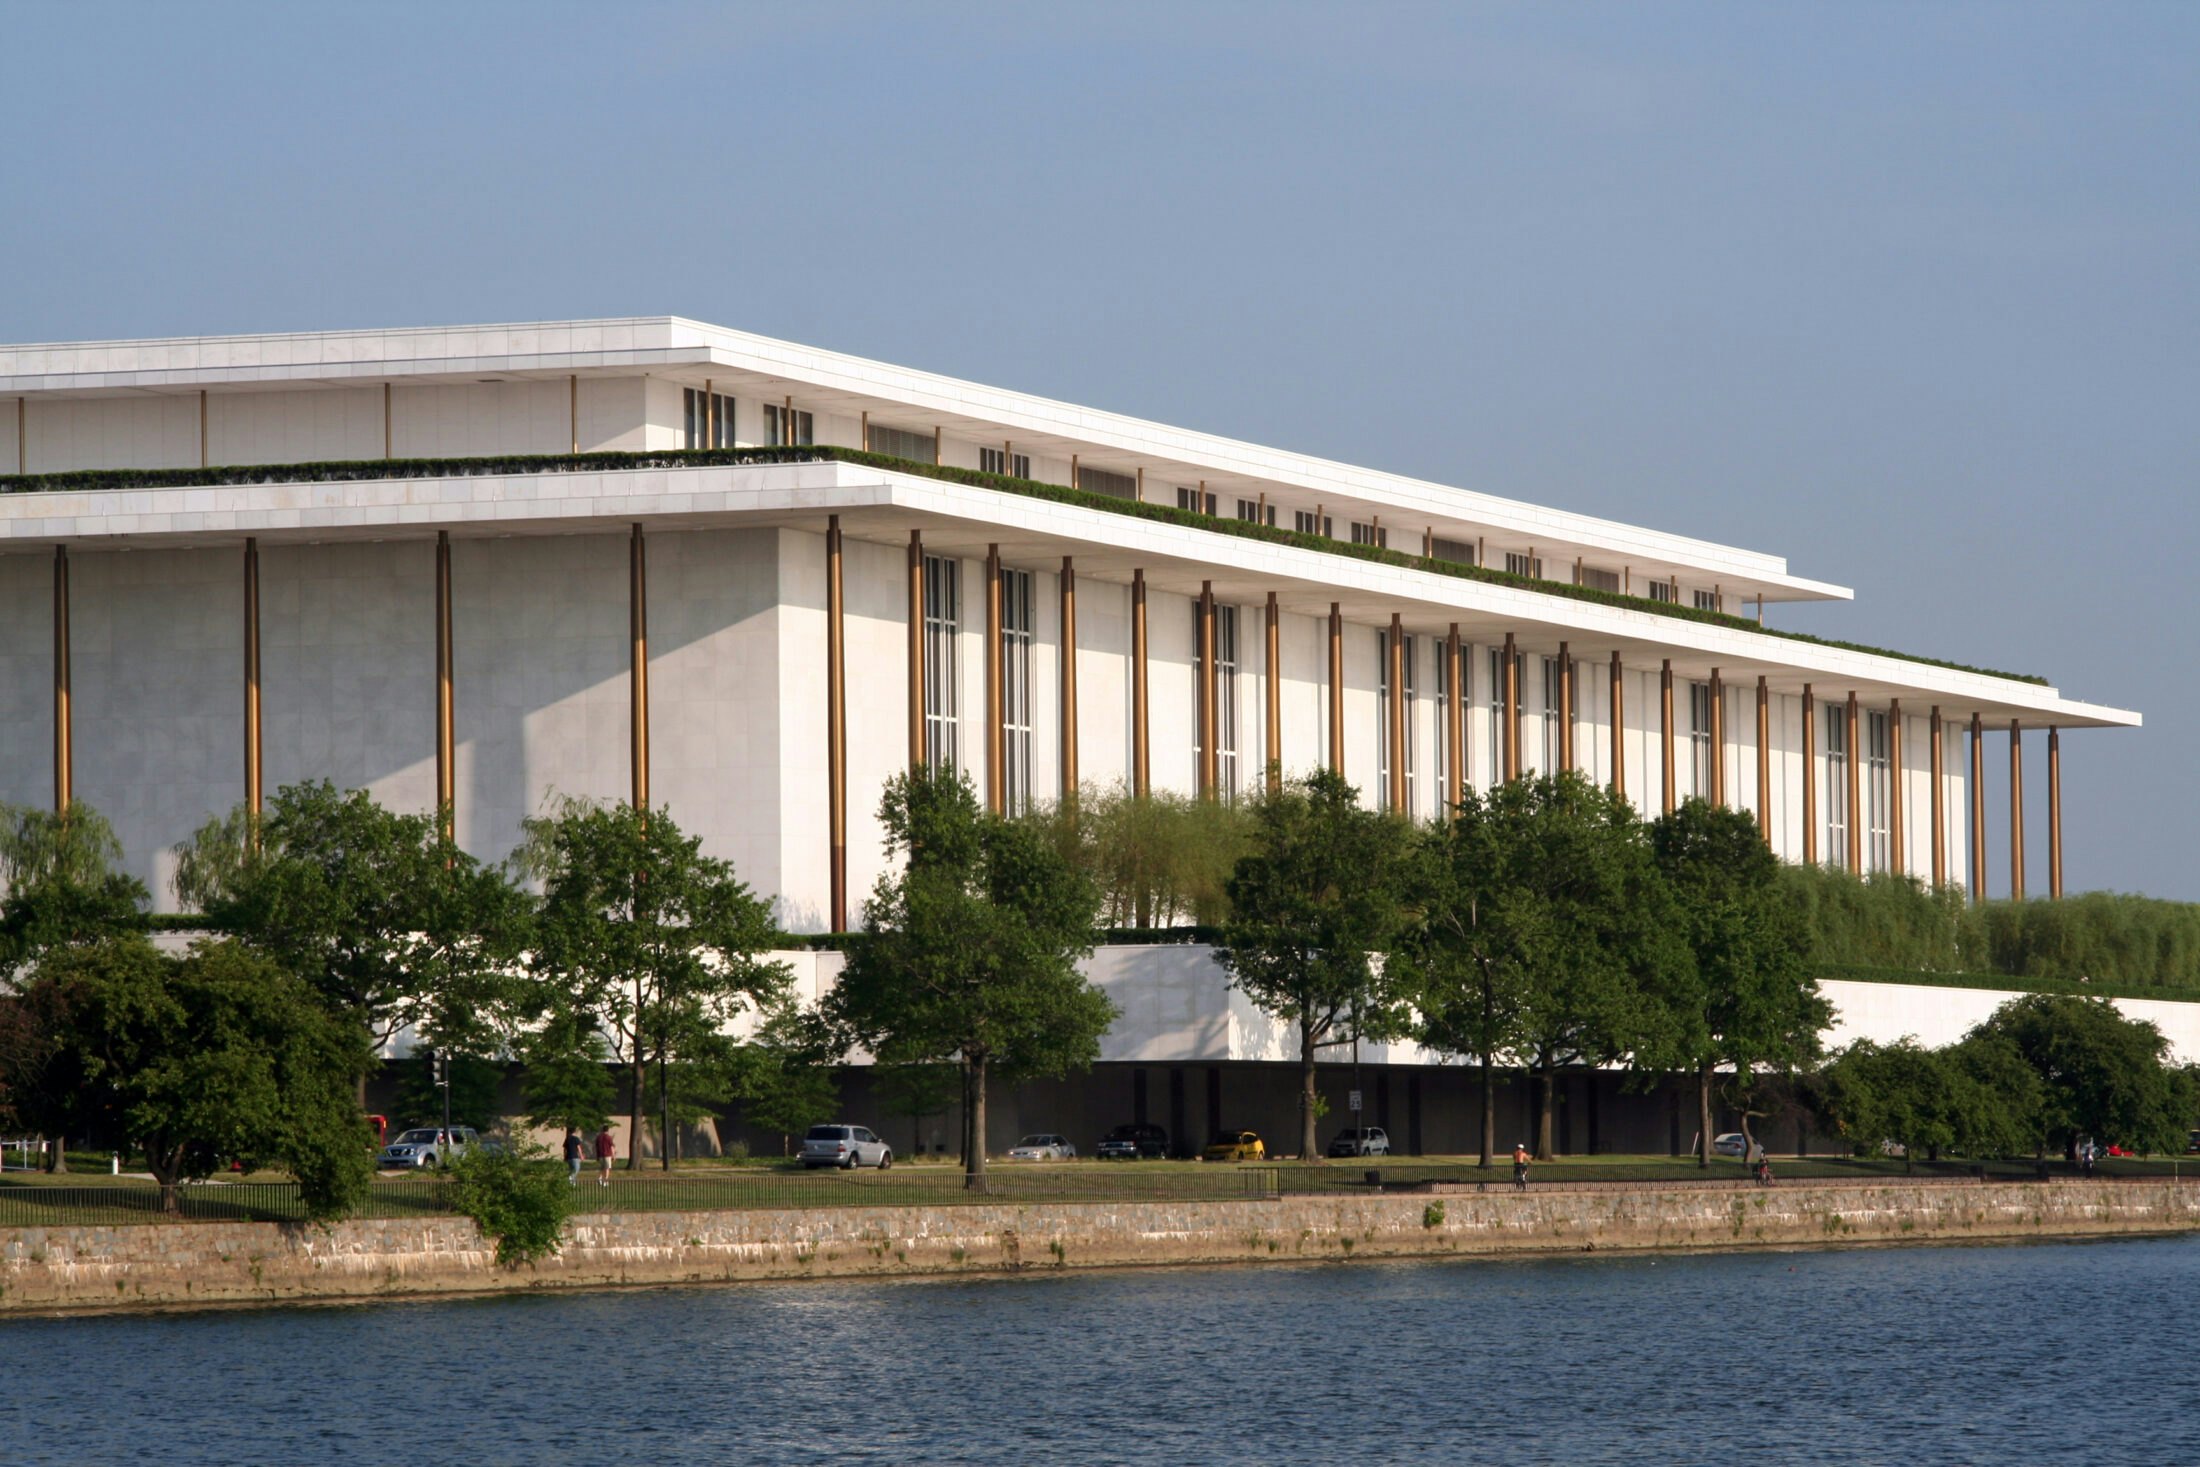 Kennedy Center - One of the top free things to do in Washington DC